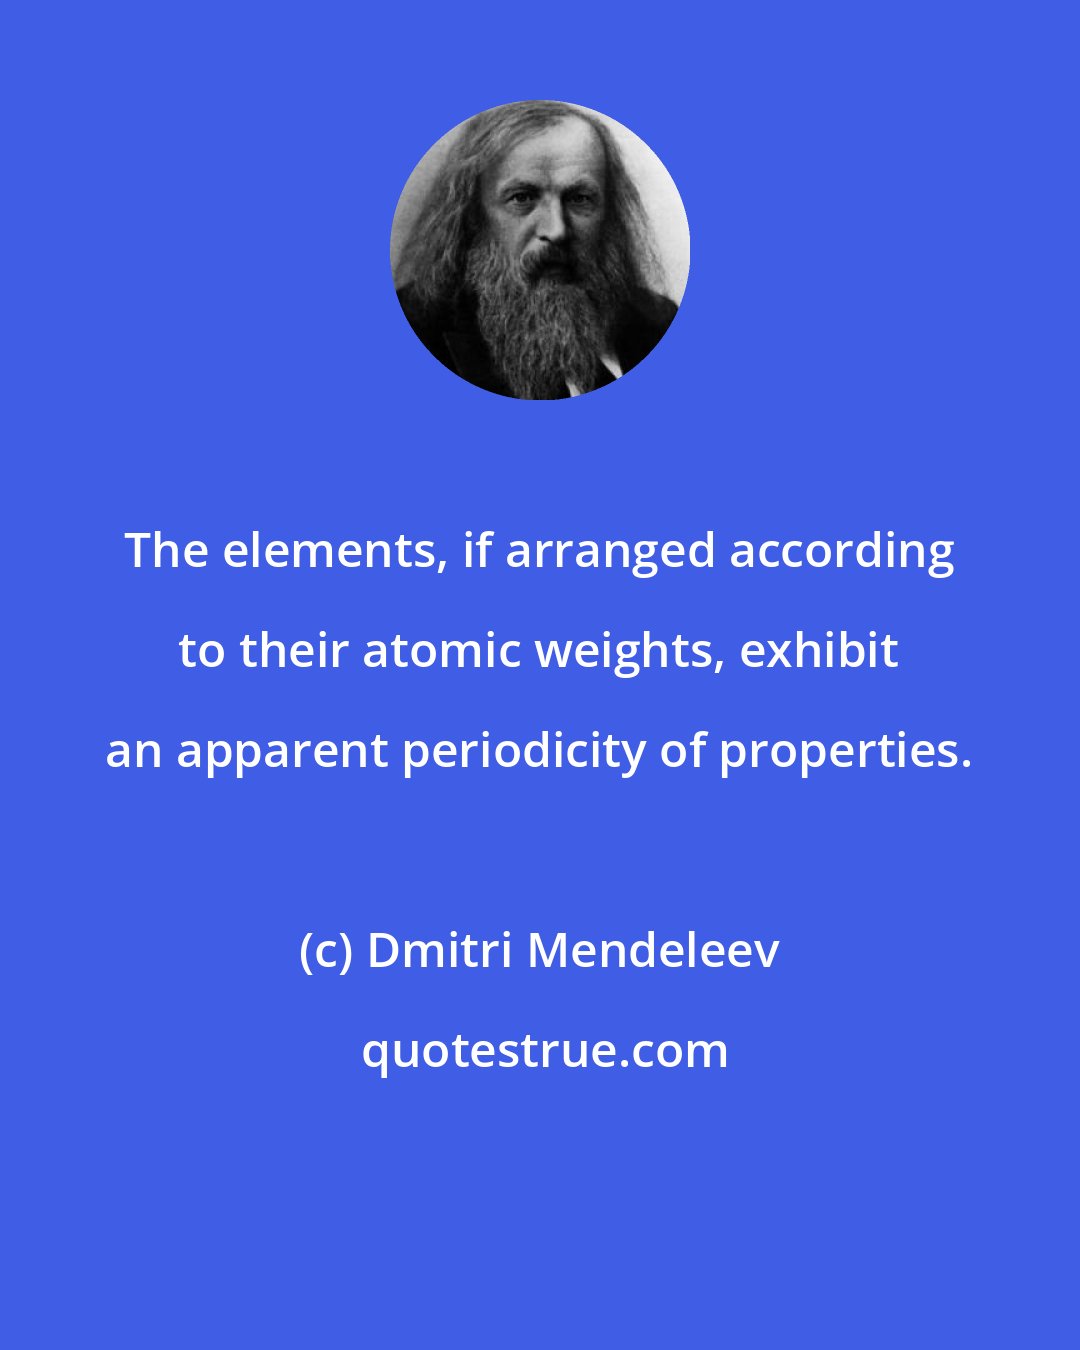 Dmitri Mendeleev: The elements, if arranged according to their atomic weights, exhibit an apparent periodicity of properties.